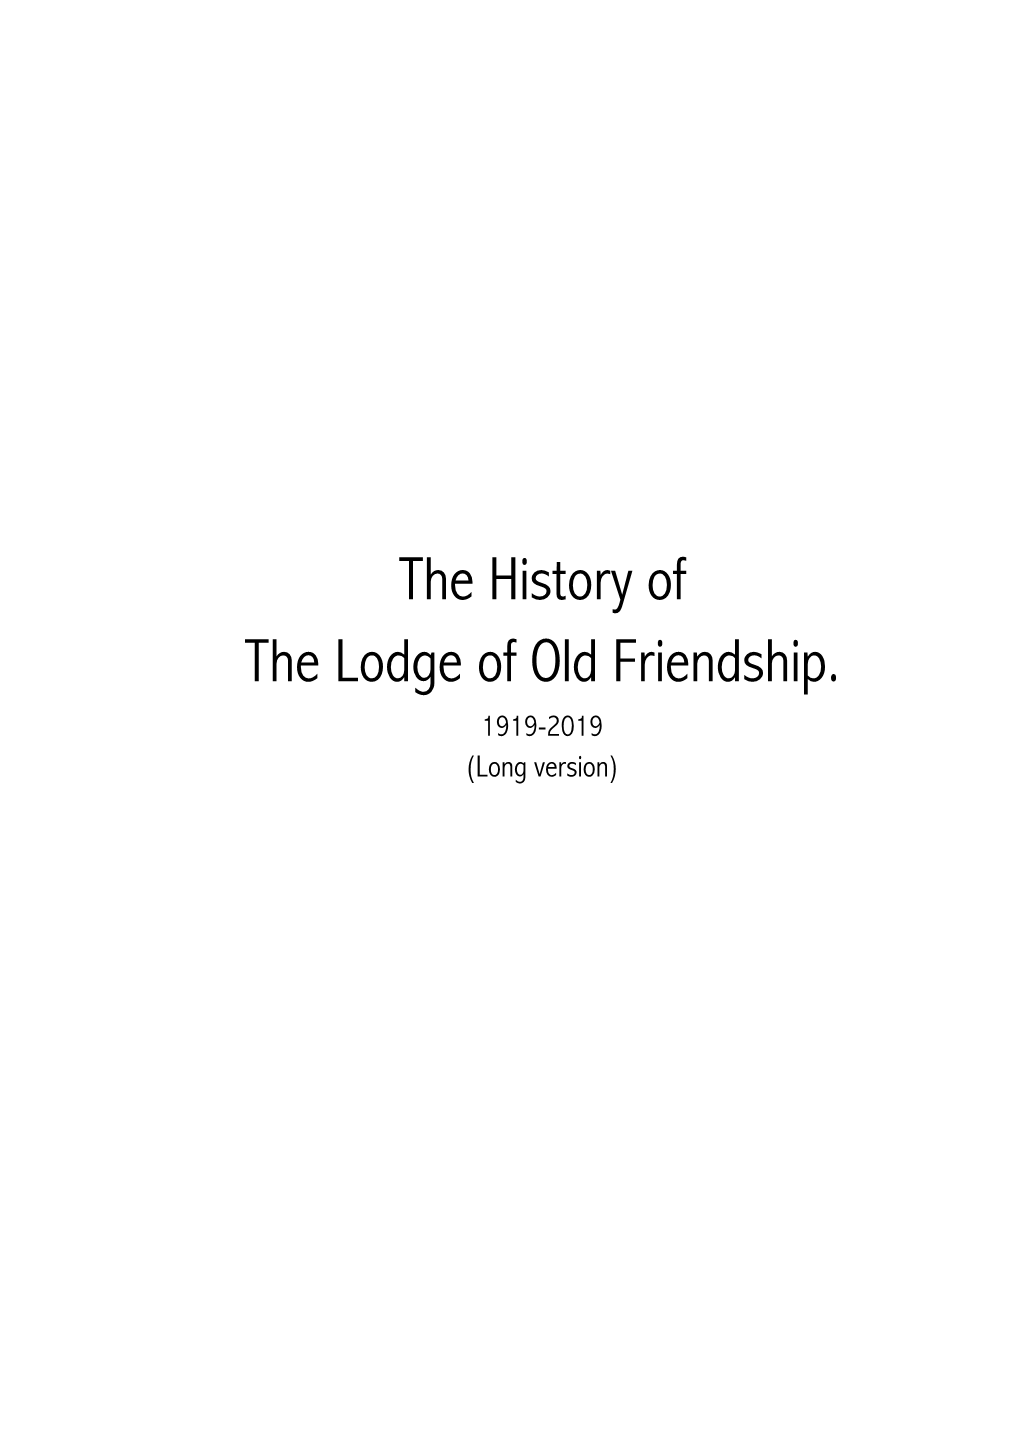 The History of the Lodge of Old Friendship. 1919-2019 (Long Version)